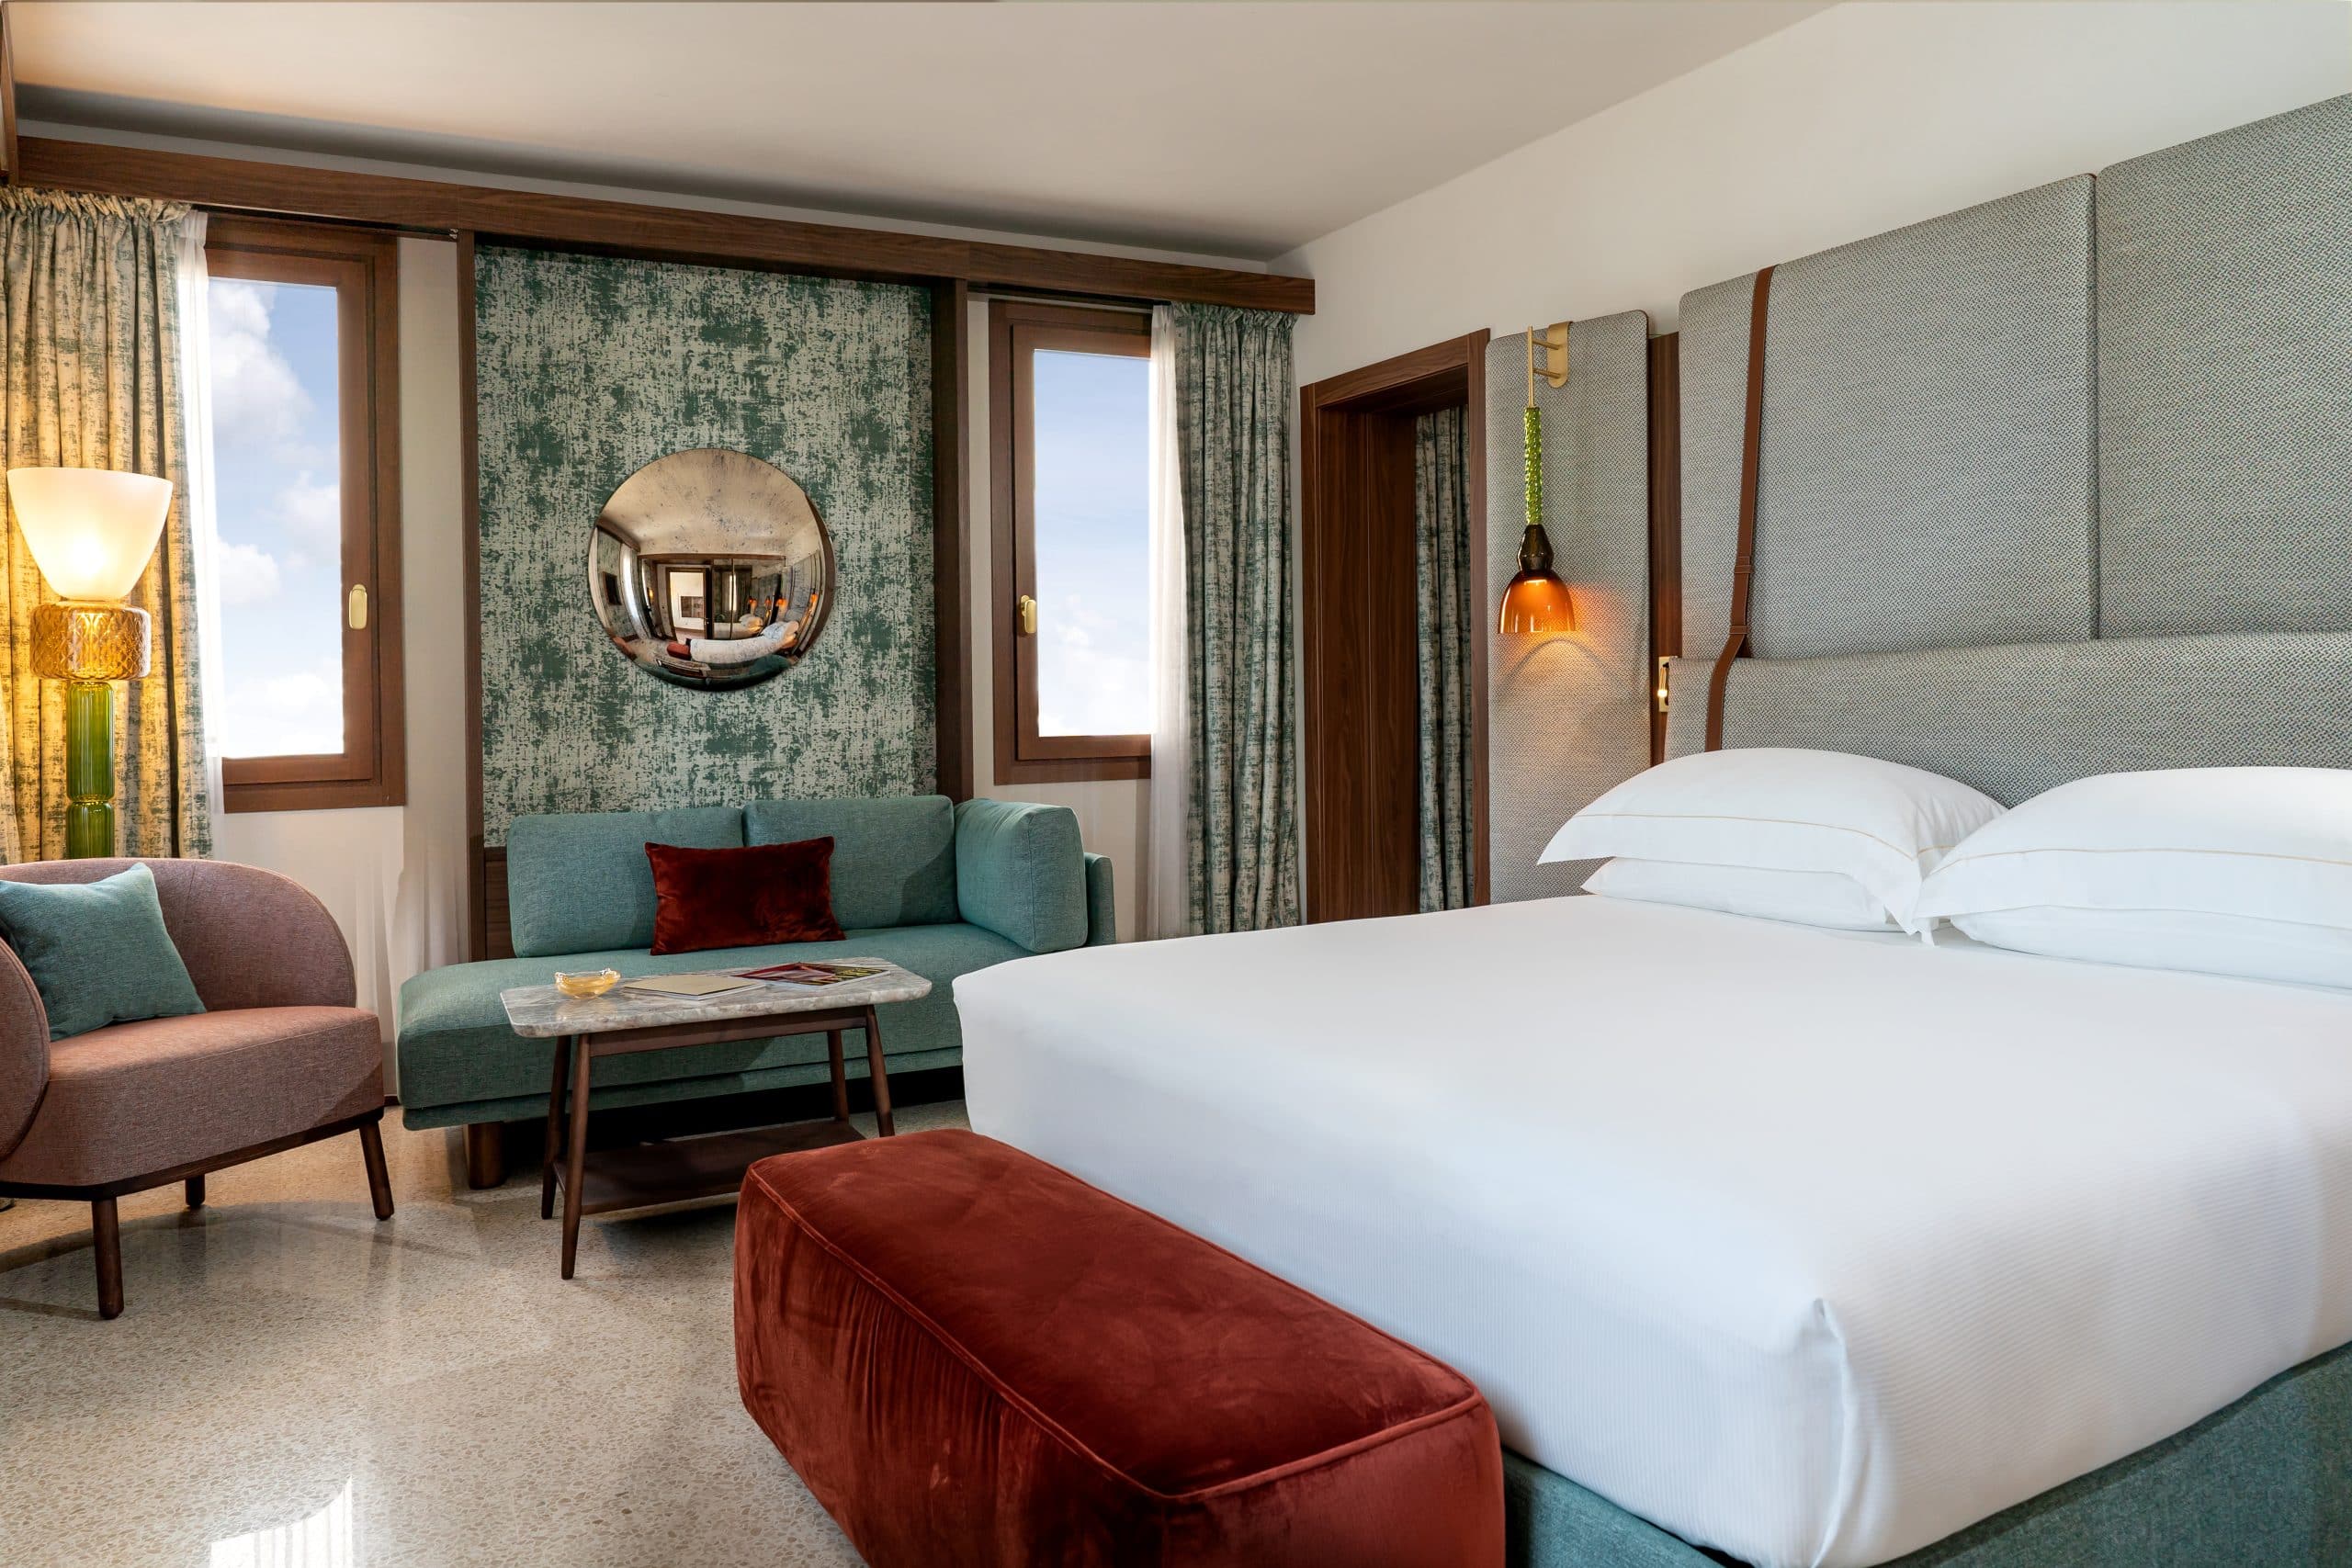 Venice's new Ca' di Dio hotel guest room with custom beds, armchairs, sofas and small tables Patricia Urquiola designed with Molteni